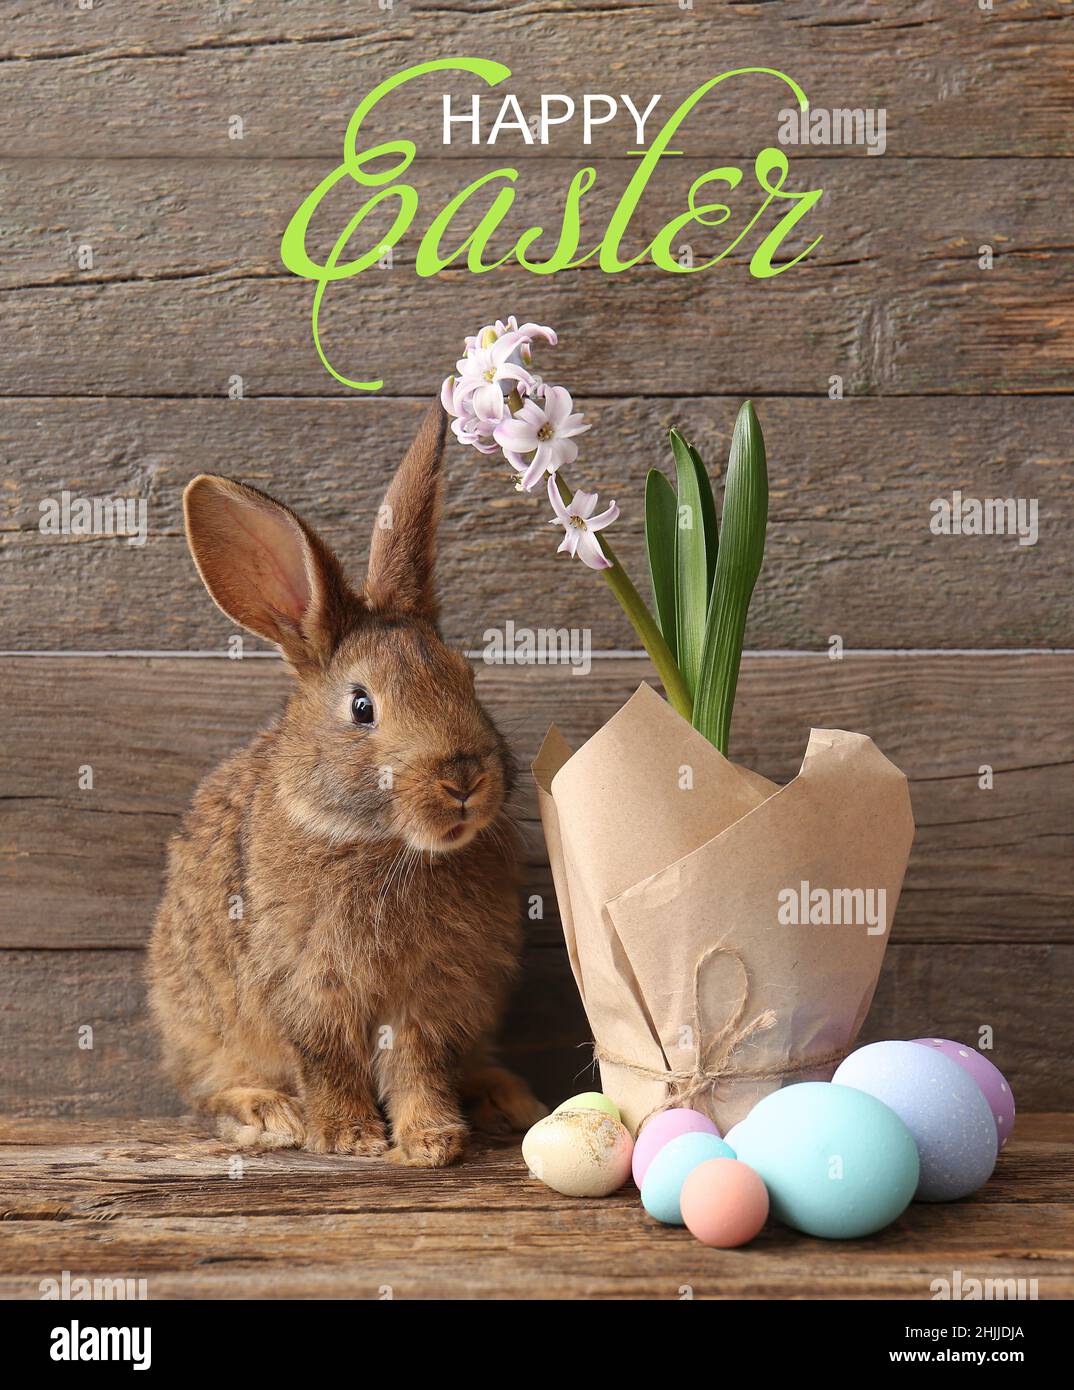 Beautiful greeting card for Happy Easter with cute rabbit and eggs ...